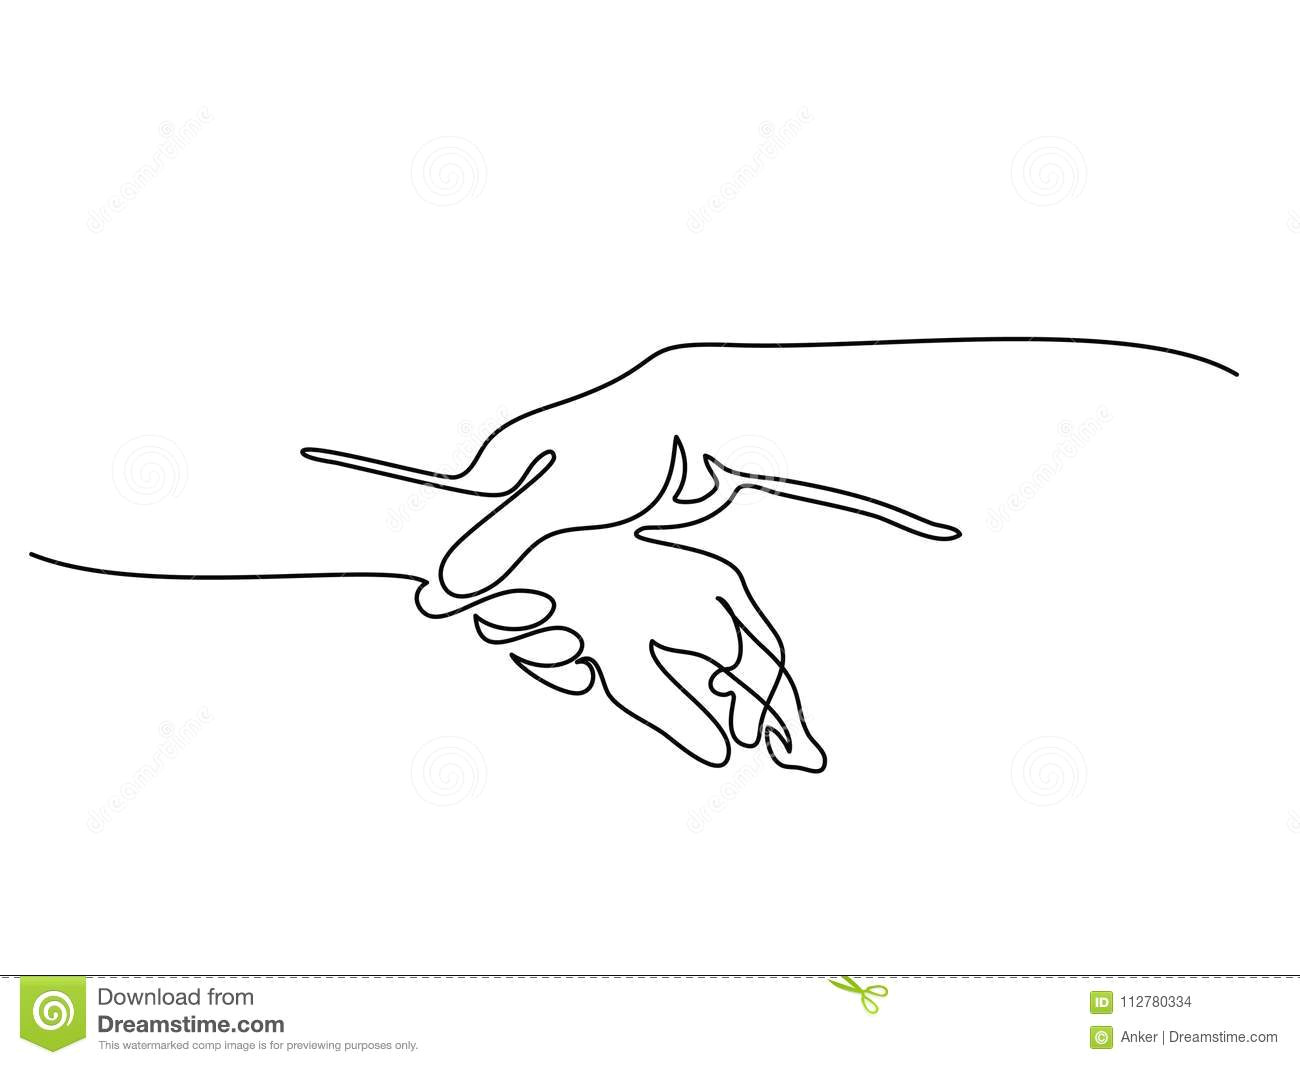 Drawings Of Hands together Holding Man and Woman Hands together Stock Vector Illustration Of